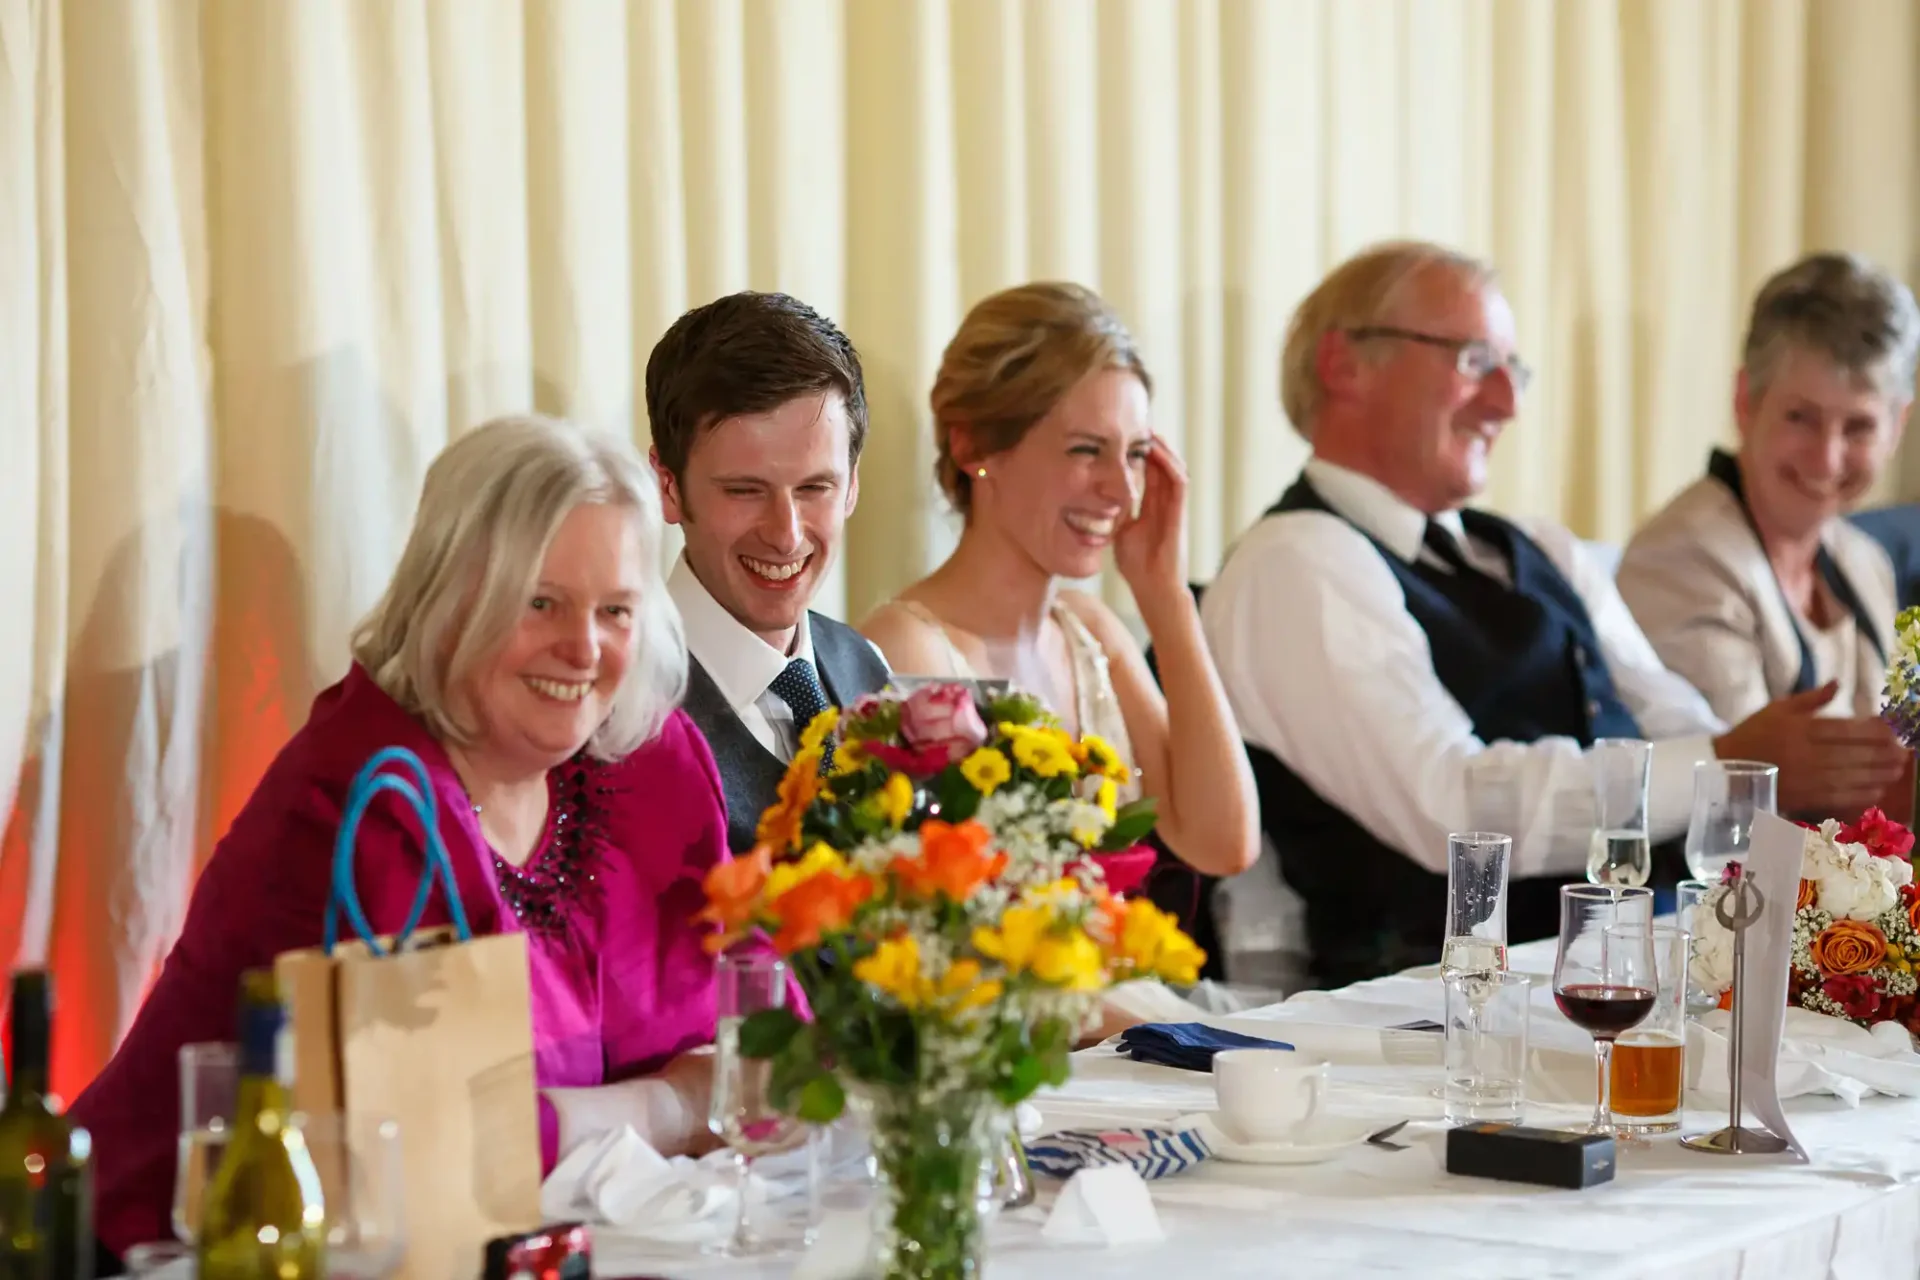 A group of five adults laughing at a table decorated with flowers during a formal event, with beverages and gift bags visible.